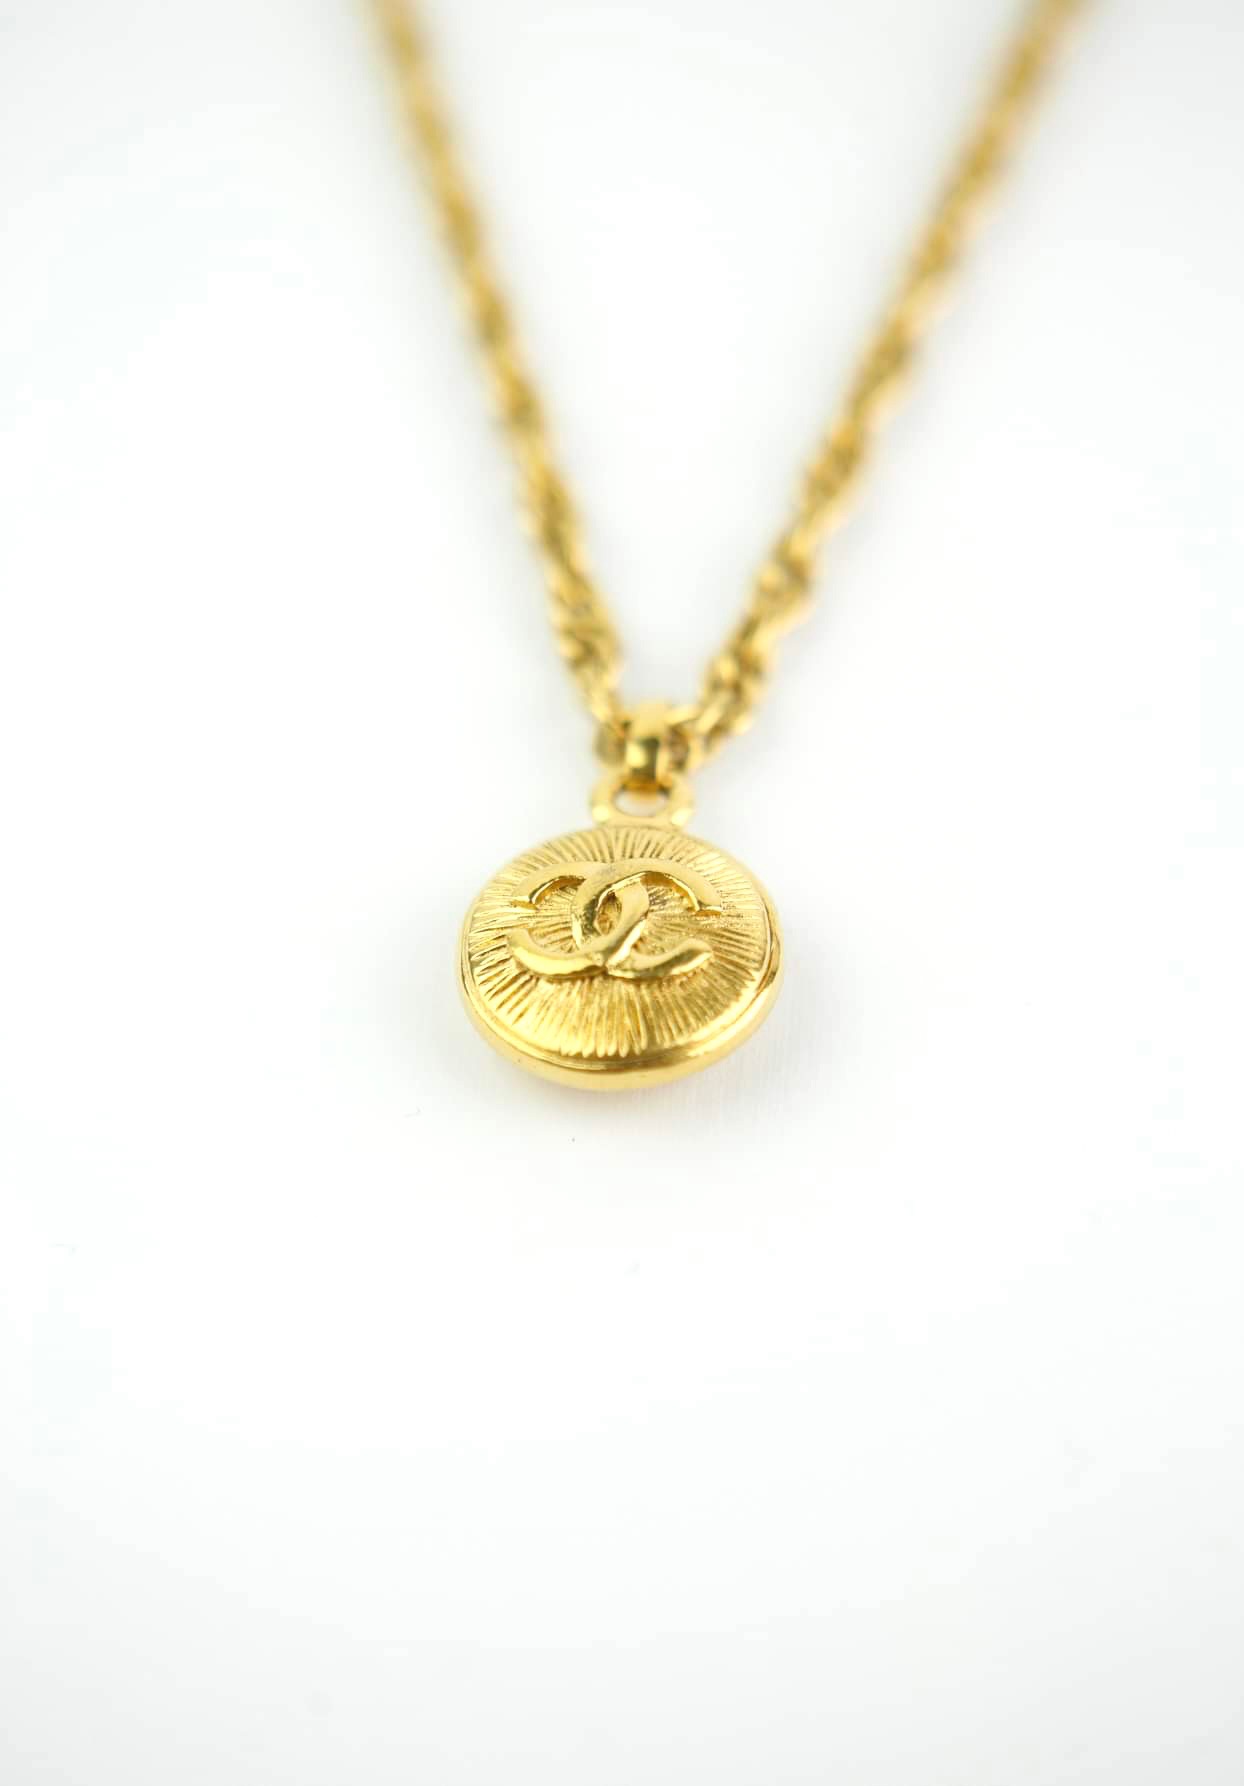 Chanel Coin Pendant Necklace - katyamaker